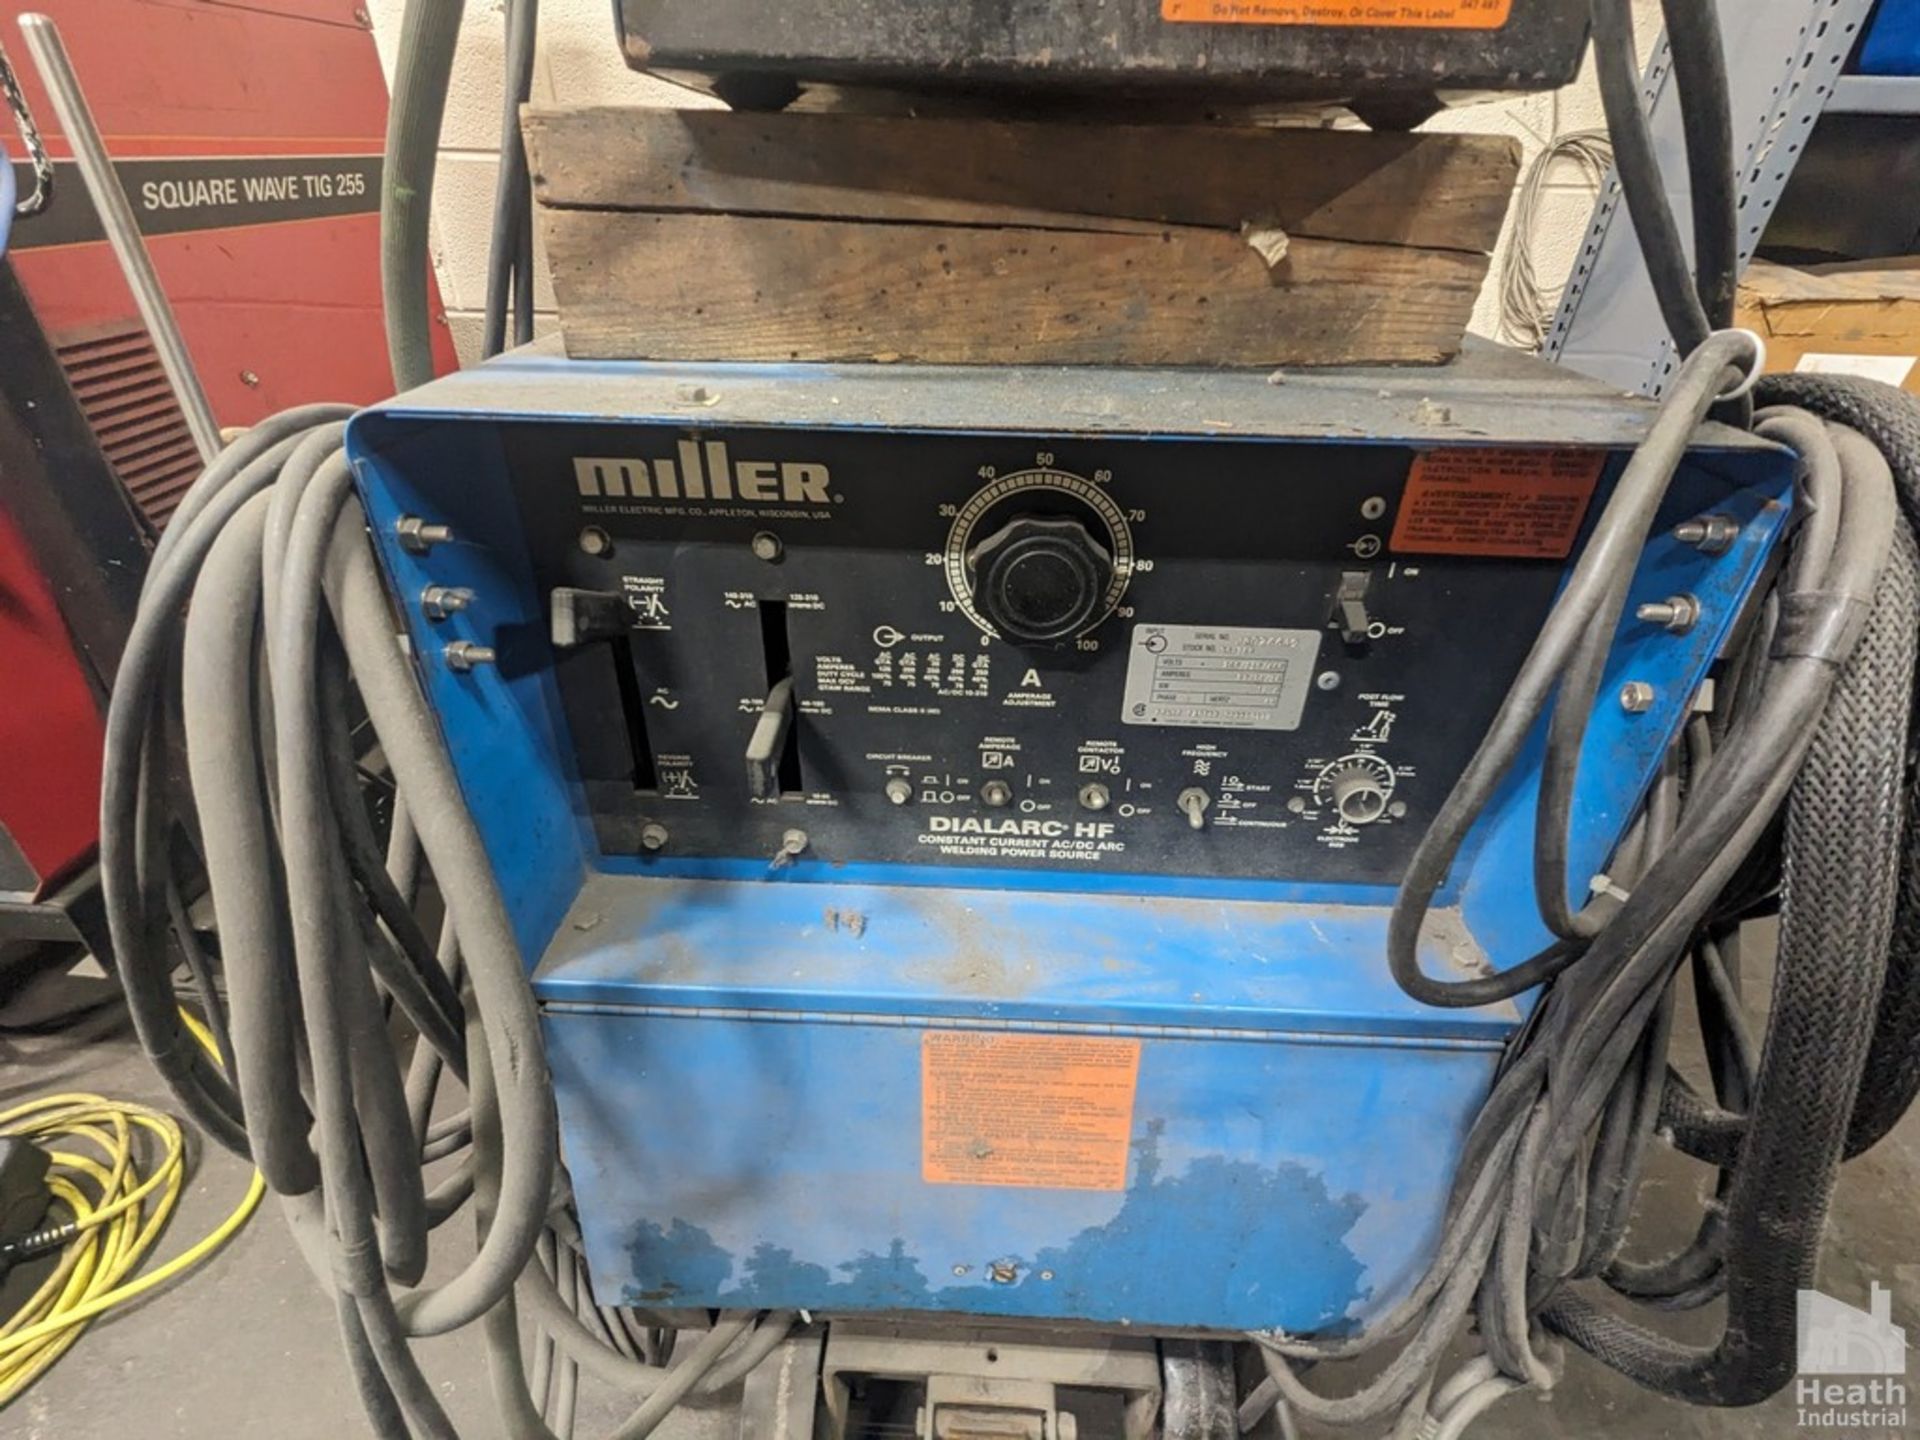 MILLER DIALARC HF ARC WELDER S/N JG026649 WITH MILLER RADIATOR -1 COOLING SYSTEM AND FOOT PEDAL - Image 2 of 7